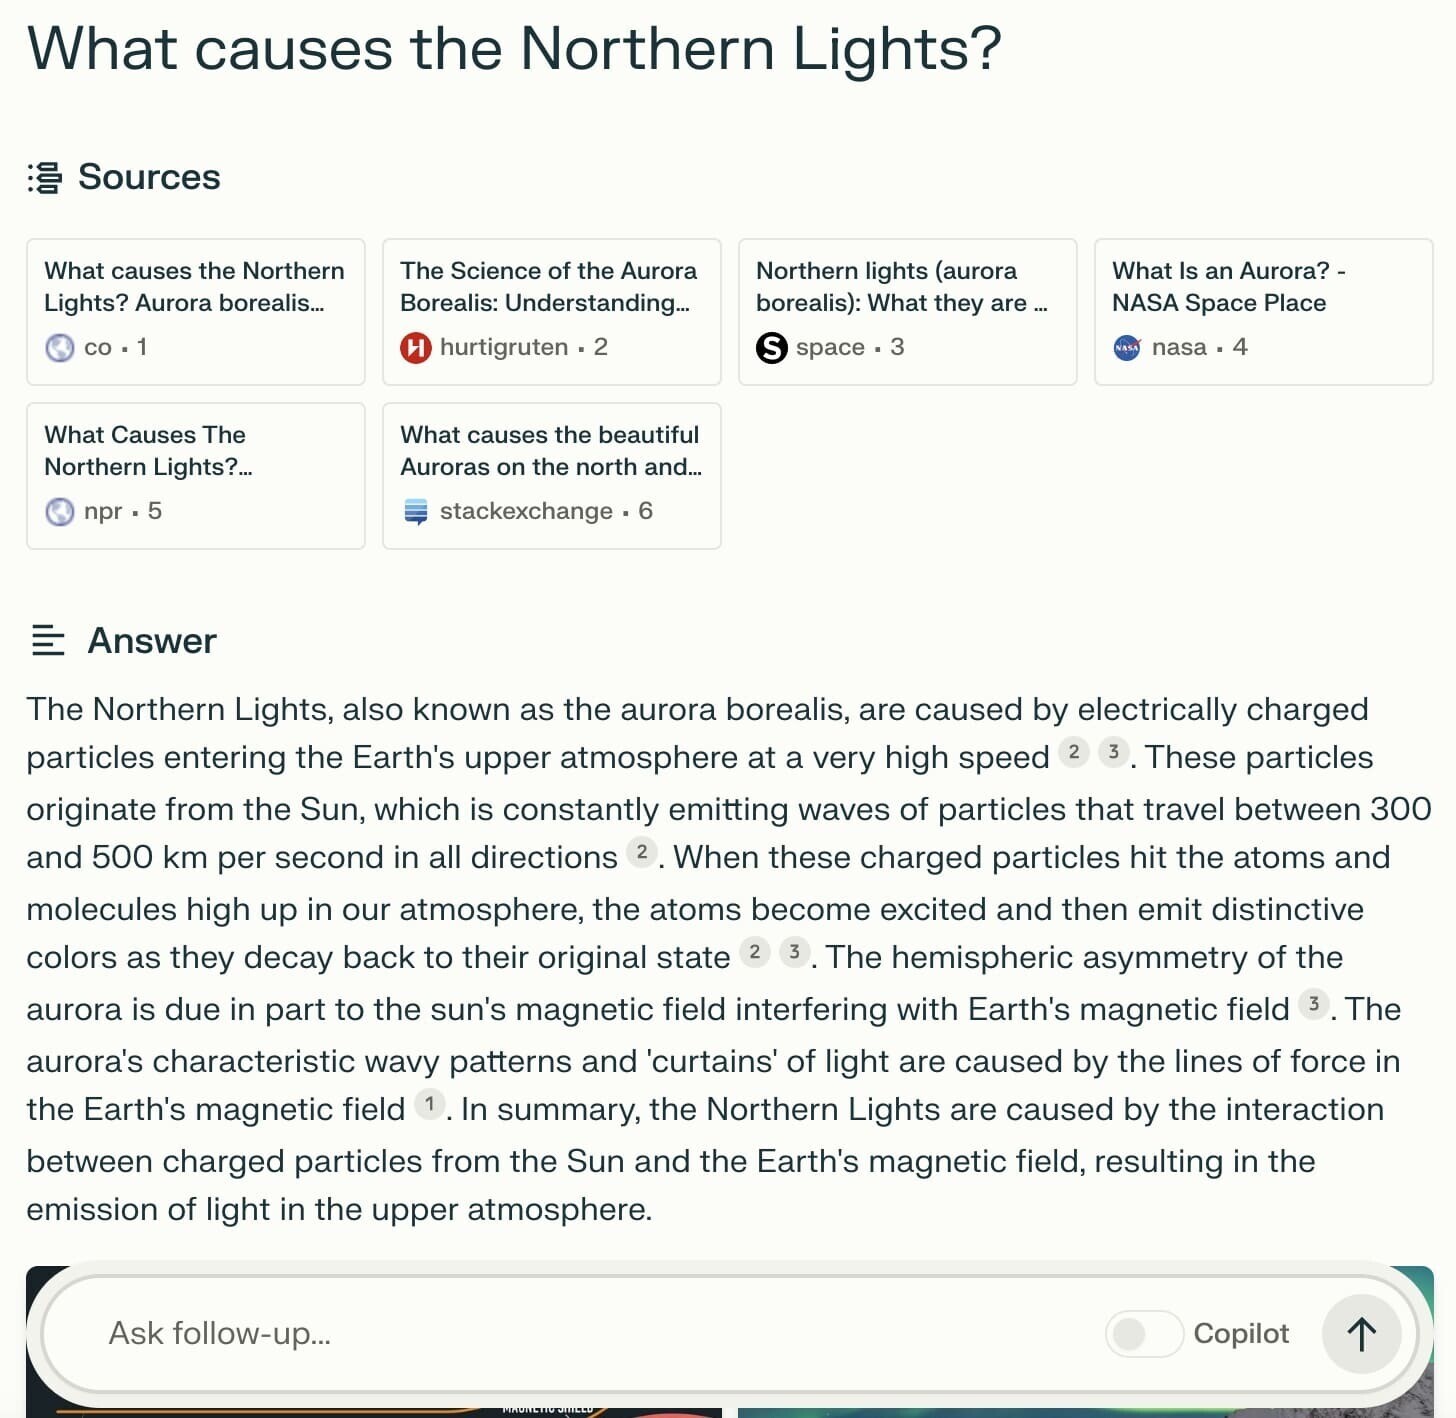 Perplexity.ai's response to "What causes the Northern Lights?" query